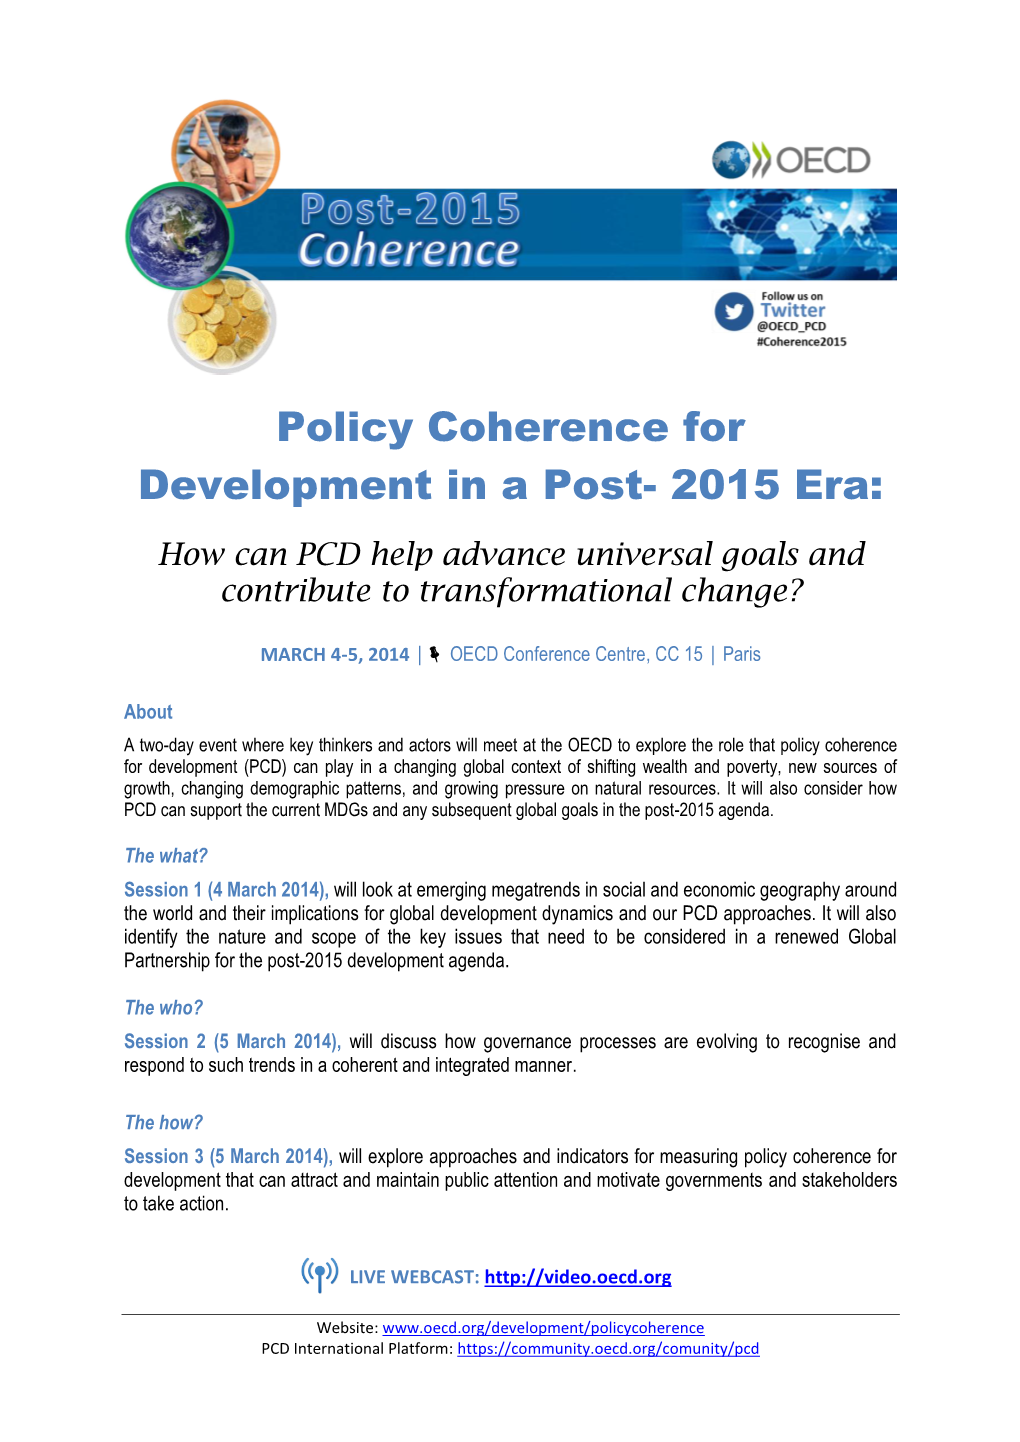 Policy Coherence for Development in a Post- 2015 Era